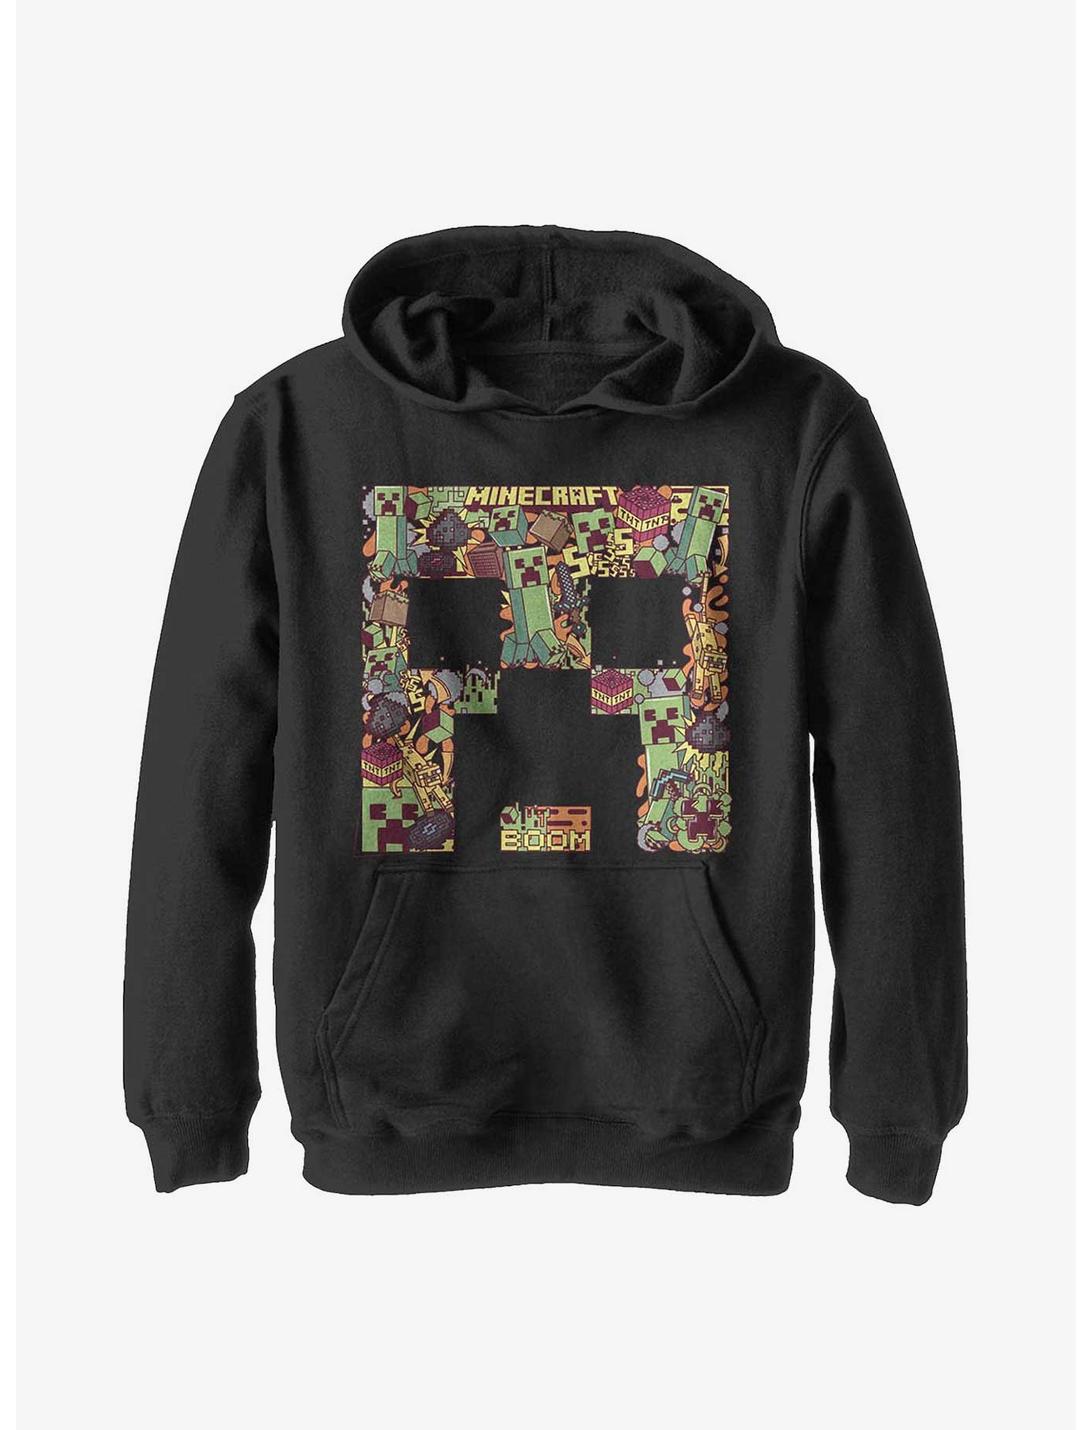 Minecraft Creeper Face Collage Youth Hoodie, BLACK, hi-res